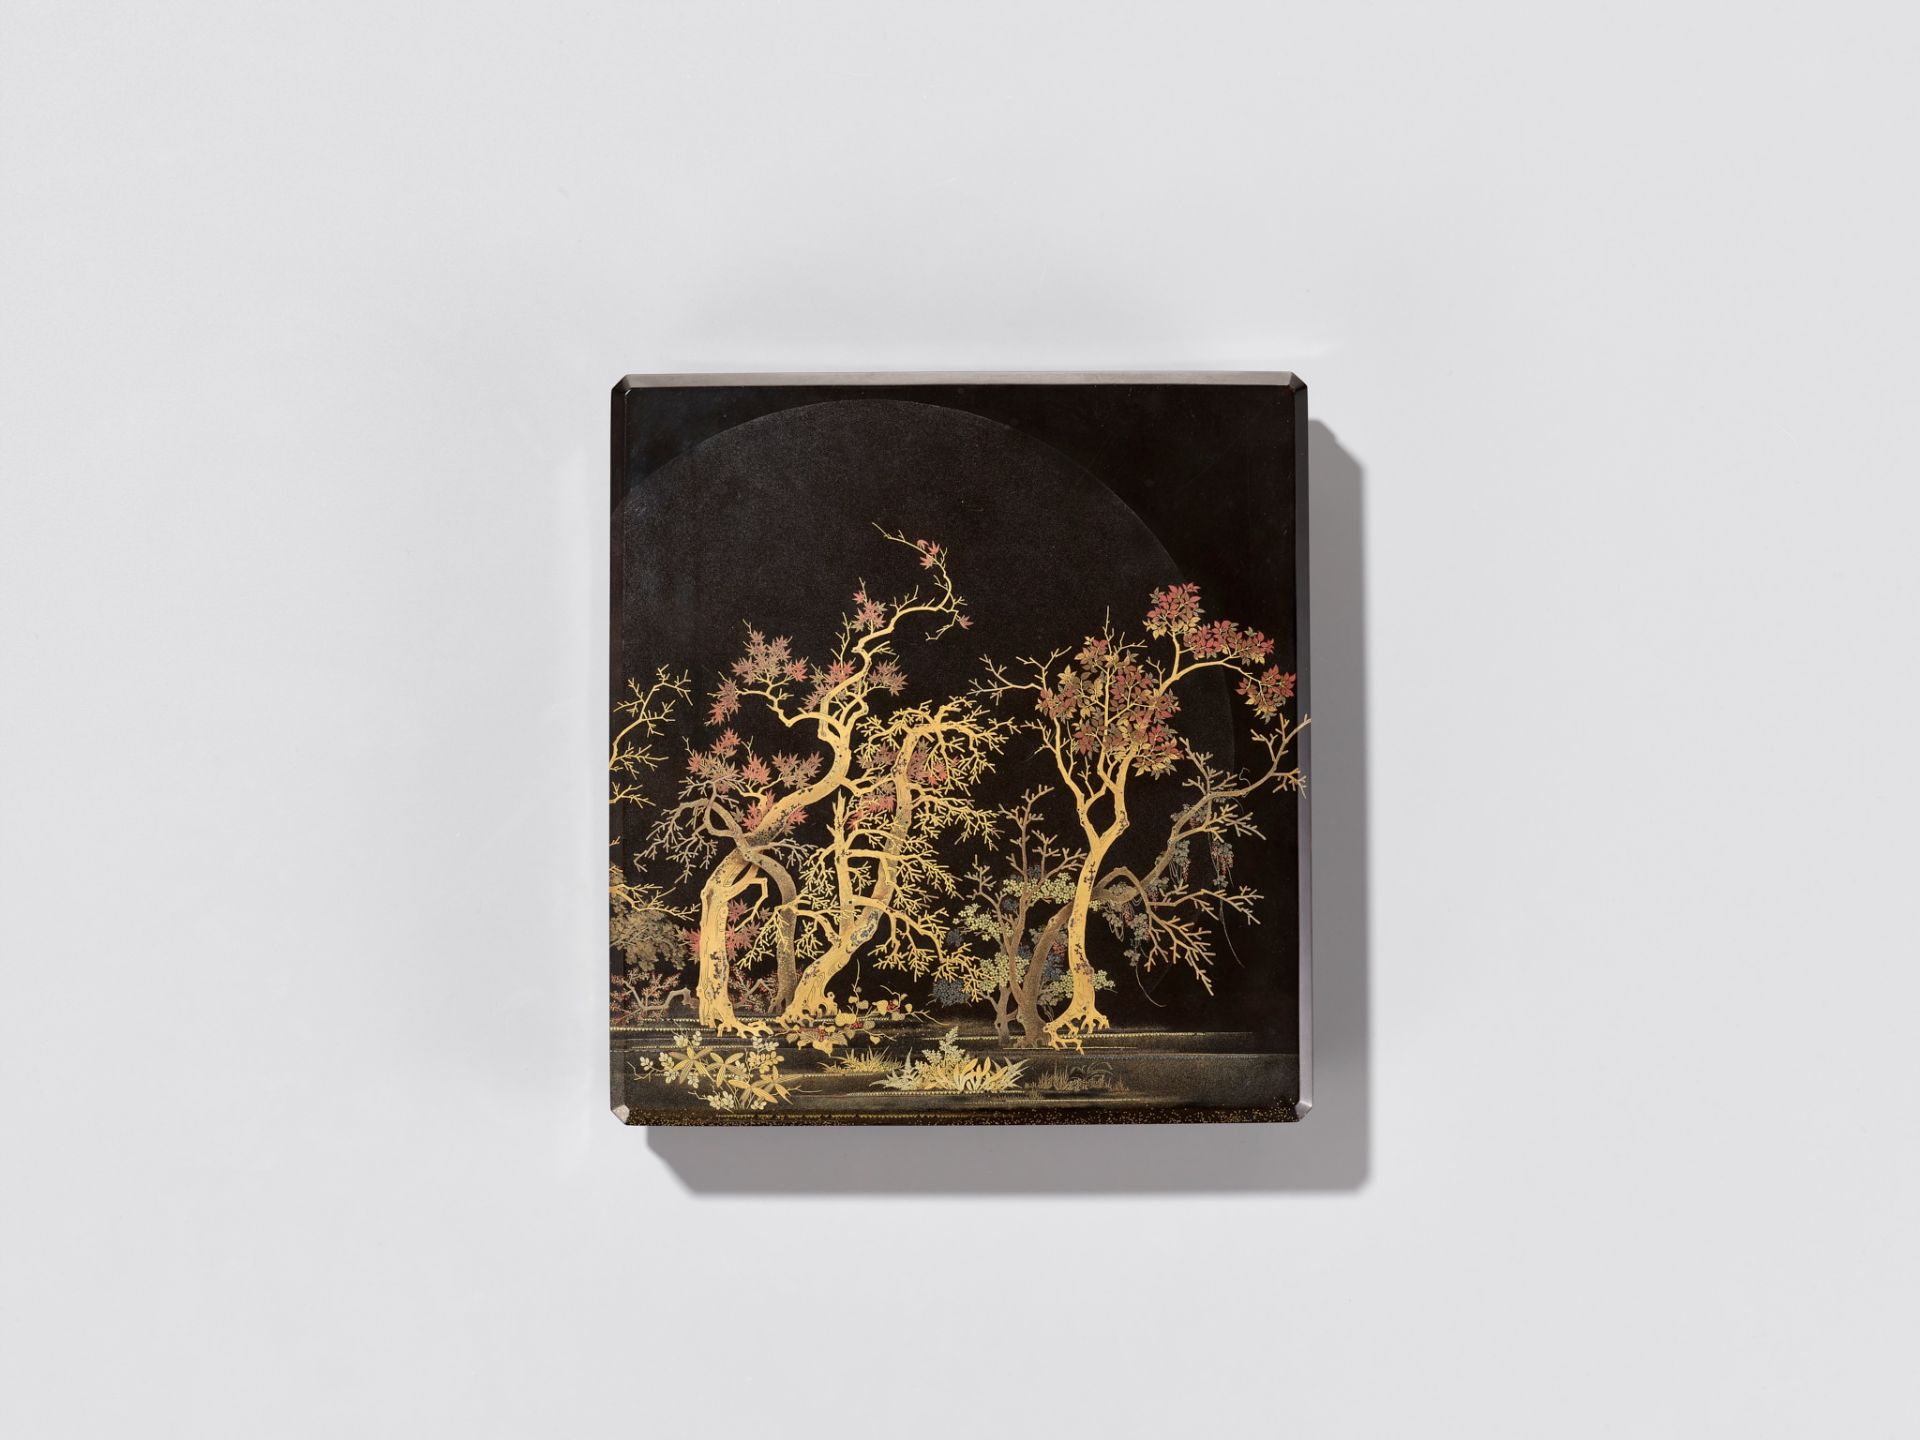 A SUPERB LACQUER SUZURIBAKO (WRITING BOX) DEPICTING A MOONLIT FOREST - Image 2 of 15